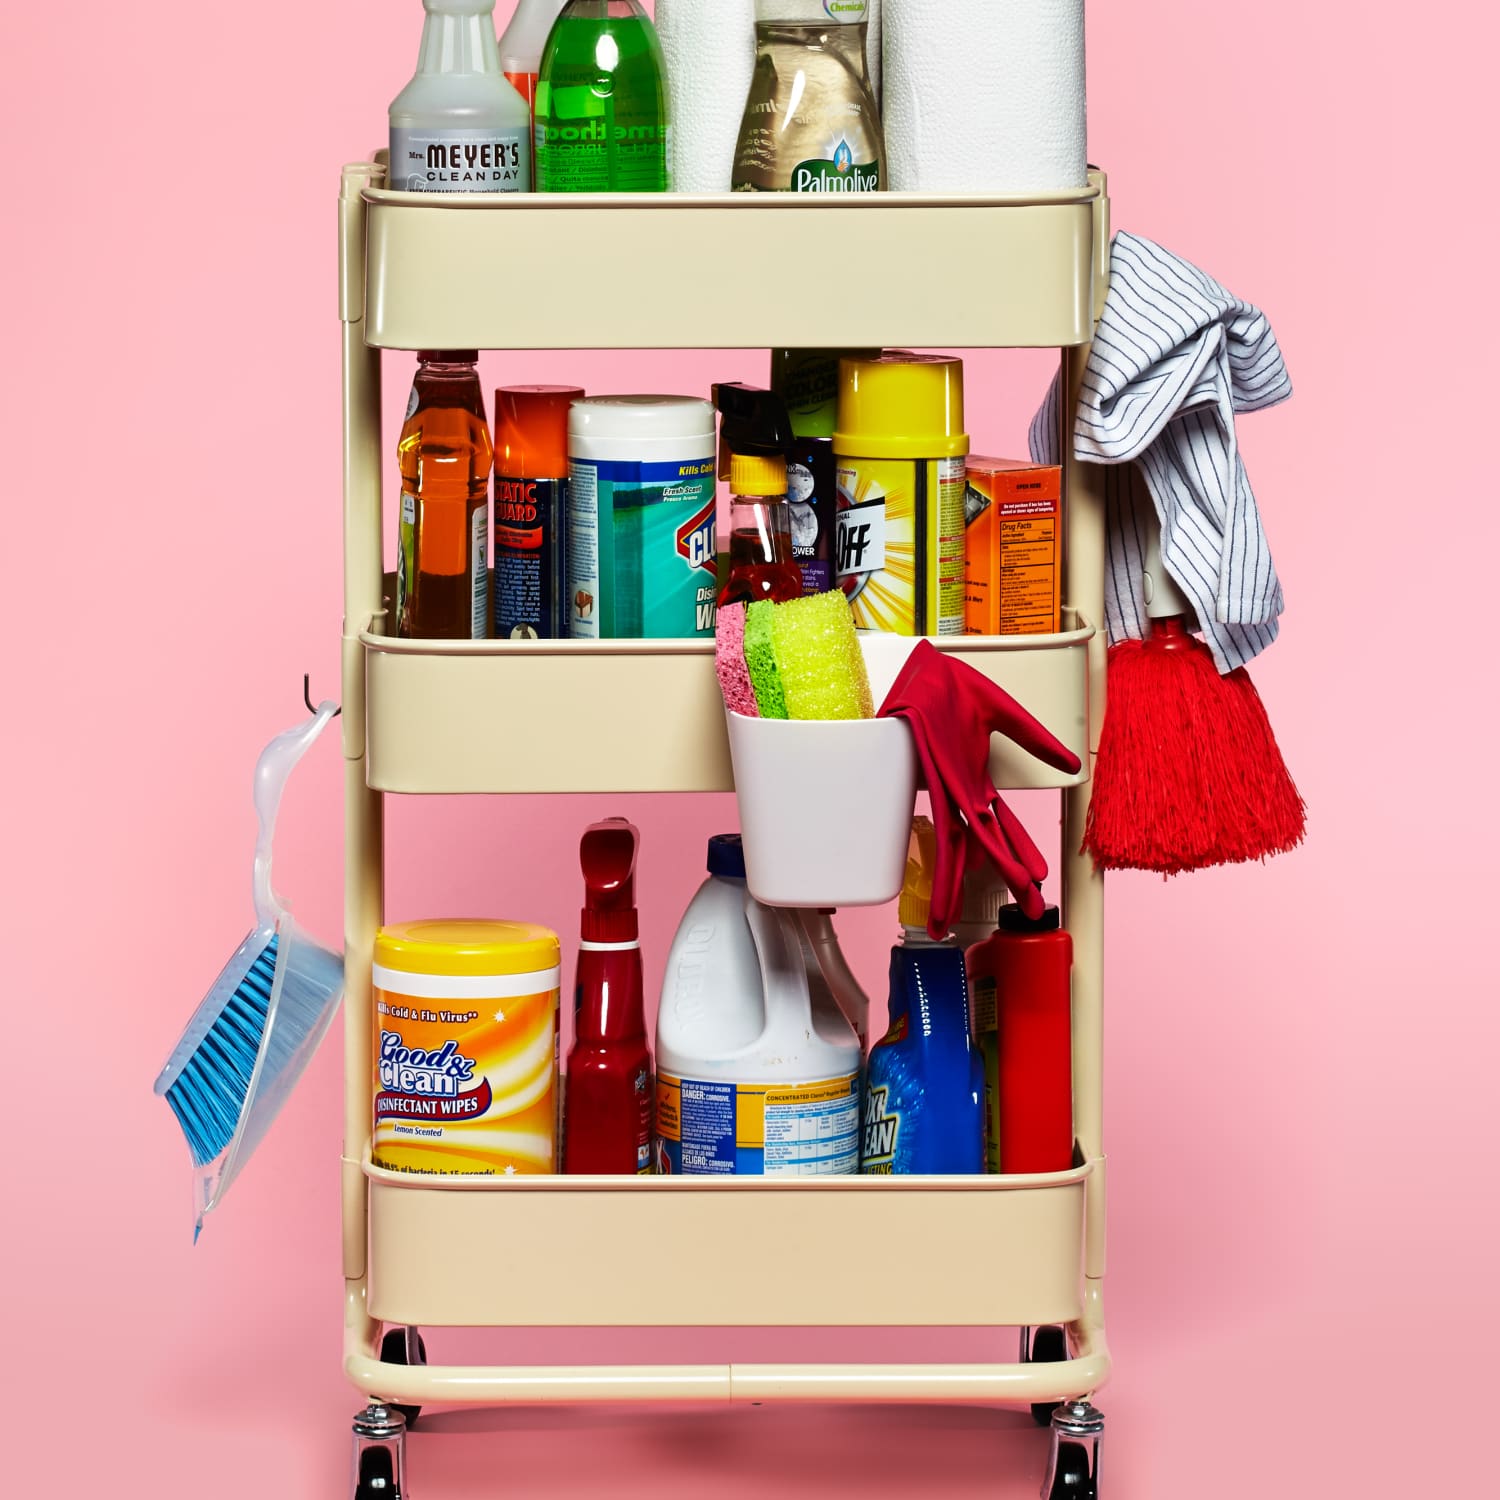 10 Must-Have Essentials for a Well Stocked Housecleaning Kit